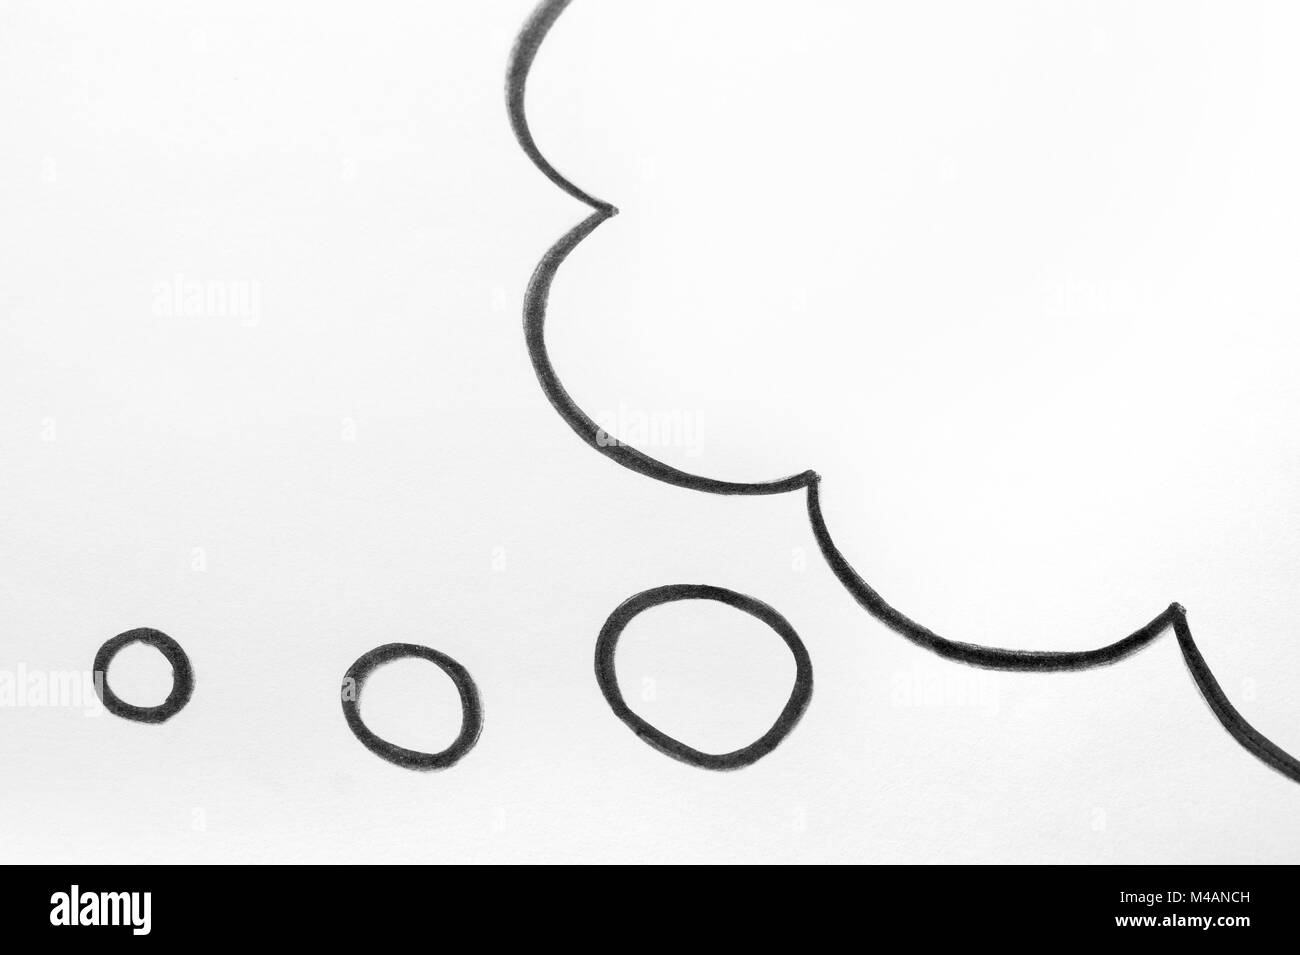 Thought cloud and thinking speech bubble balloon hand drawn on paper. Stock Photo